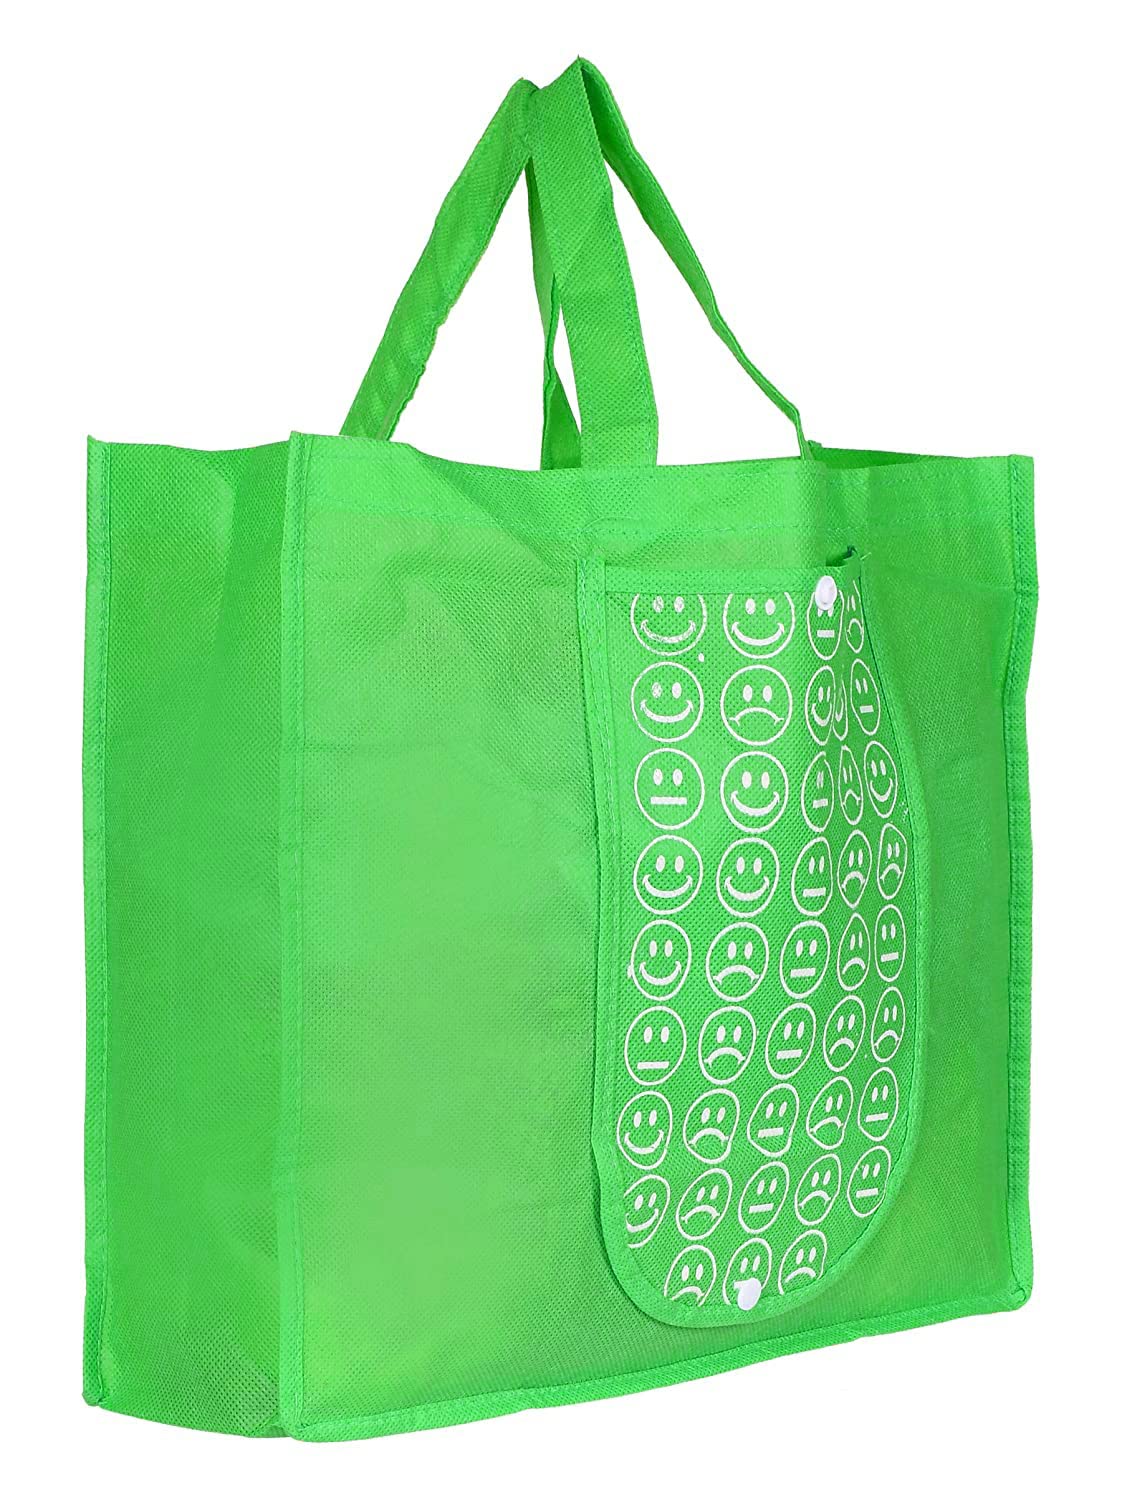 Pick n Pay launches 100% RPET bag in aid of animal welfare - Retail Brief  Africa